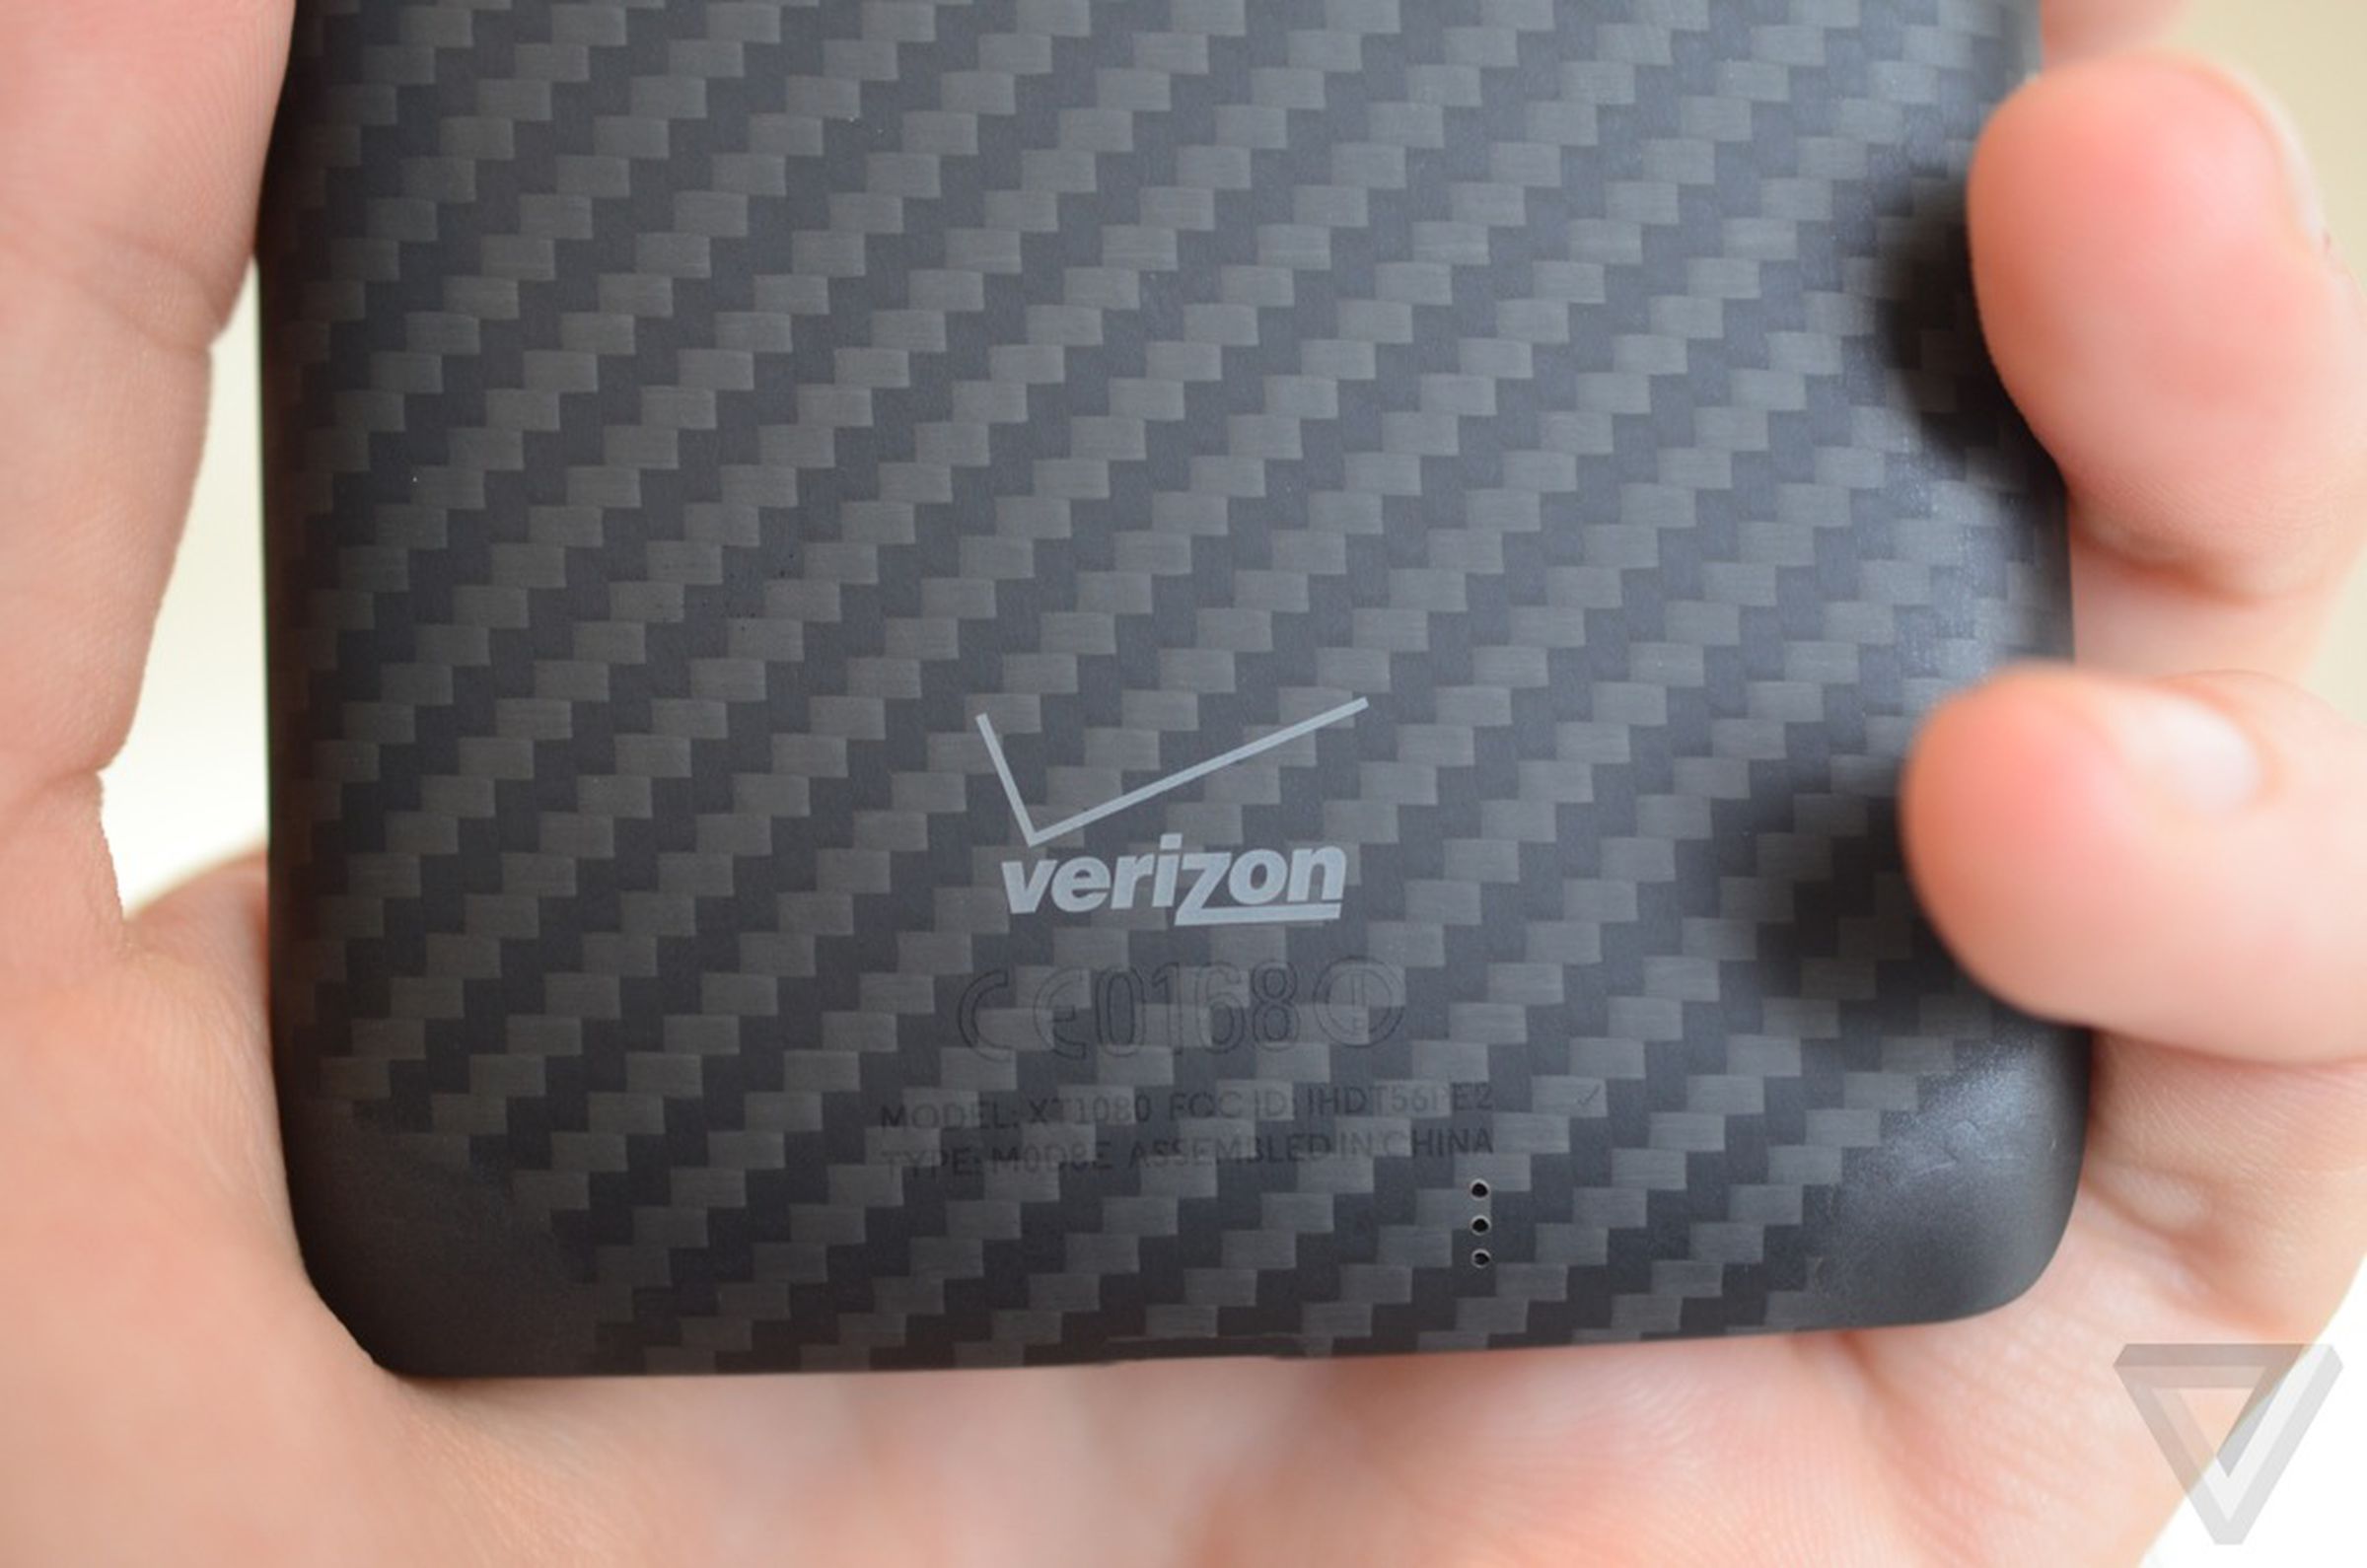 Motorola Droid Ultra, Maxx, Mini hands-on pictures